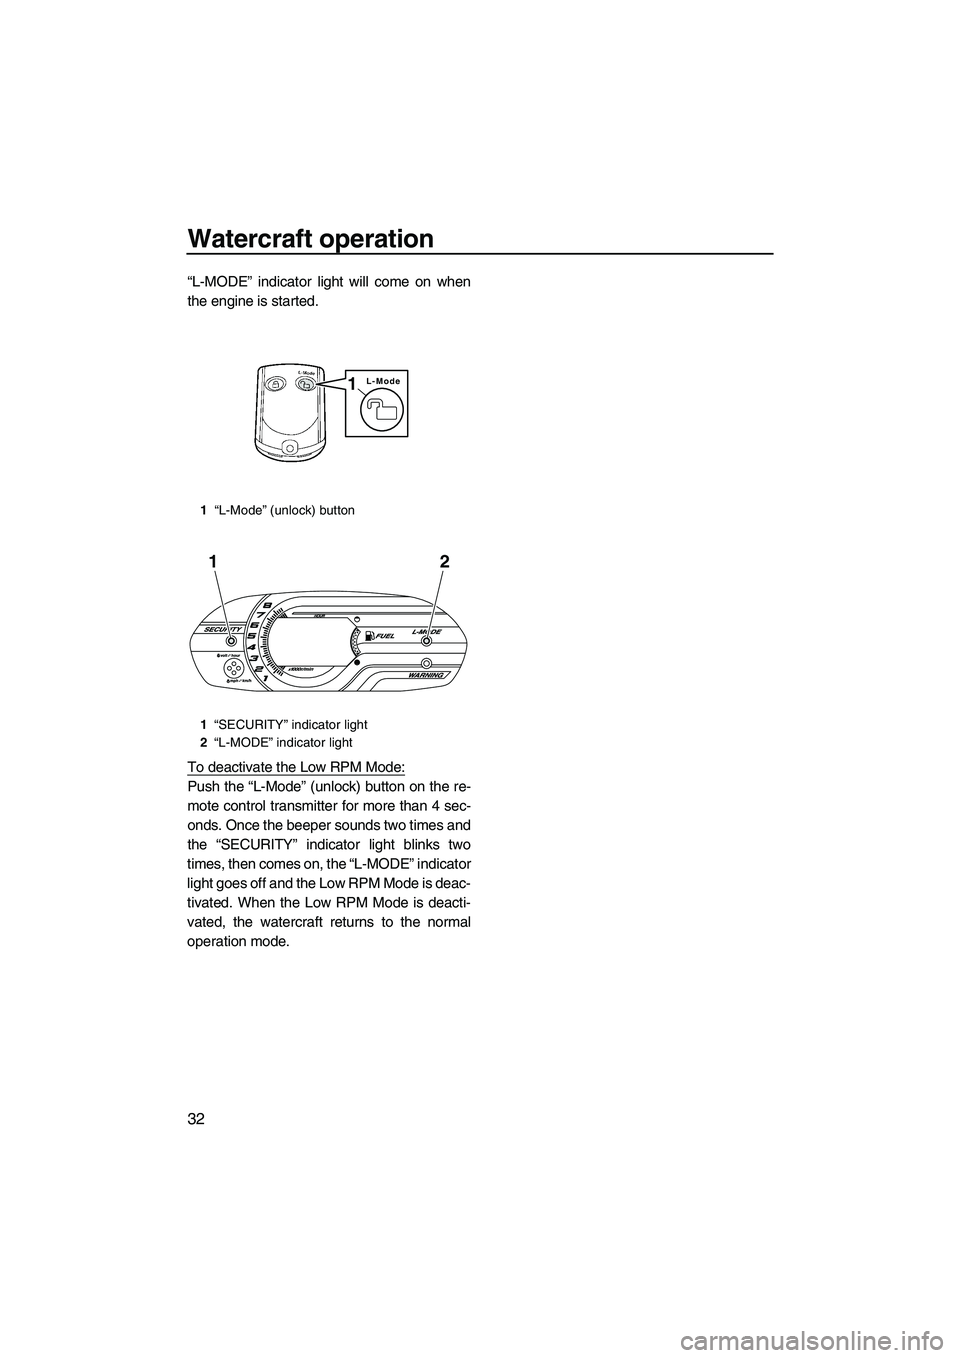 YAMAHA VXS 2012  Owners Manual Watercraft operation
32
“L-MODE” indicator light will come on when
the engine is started.
To deactivate the Low RPM Mode:
Push the “L-Mode” (unlock) button on the re-
mote control transmitter 